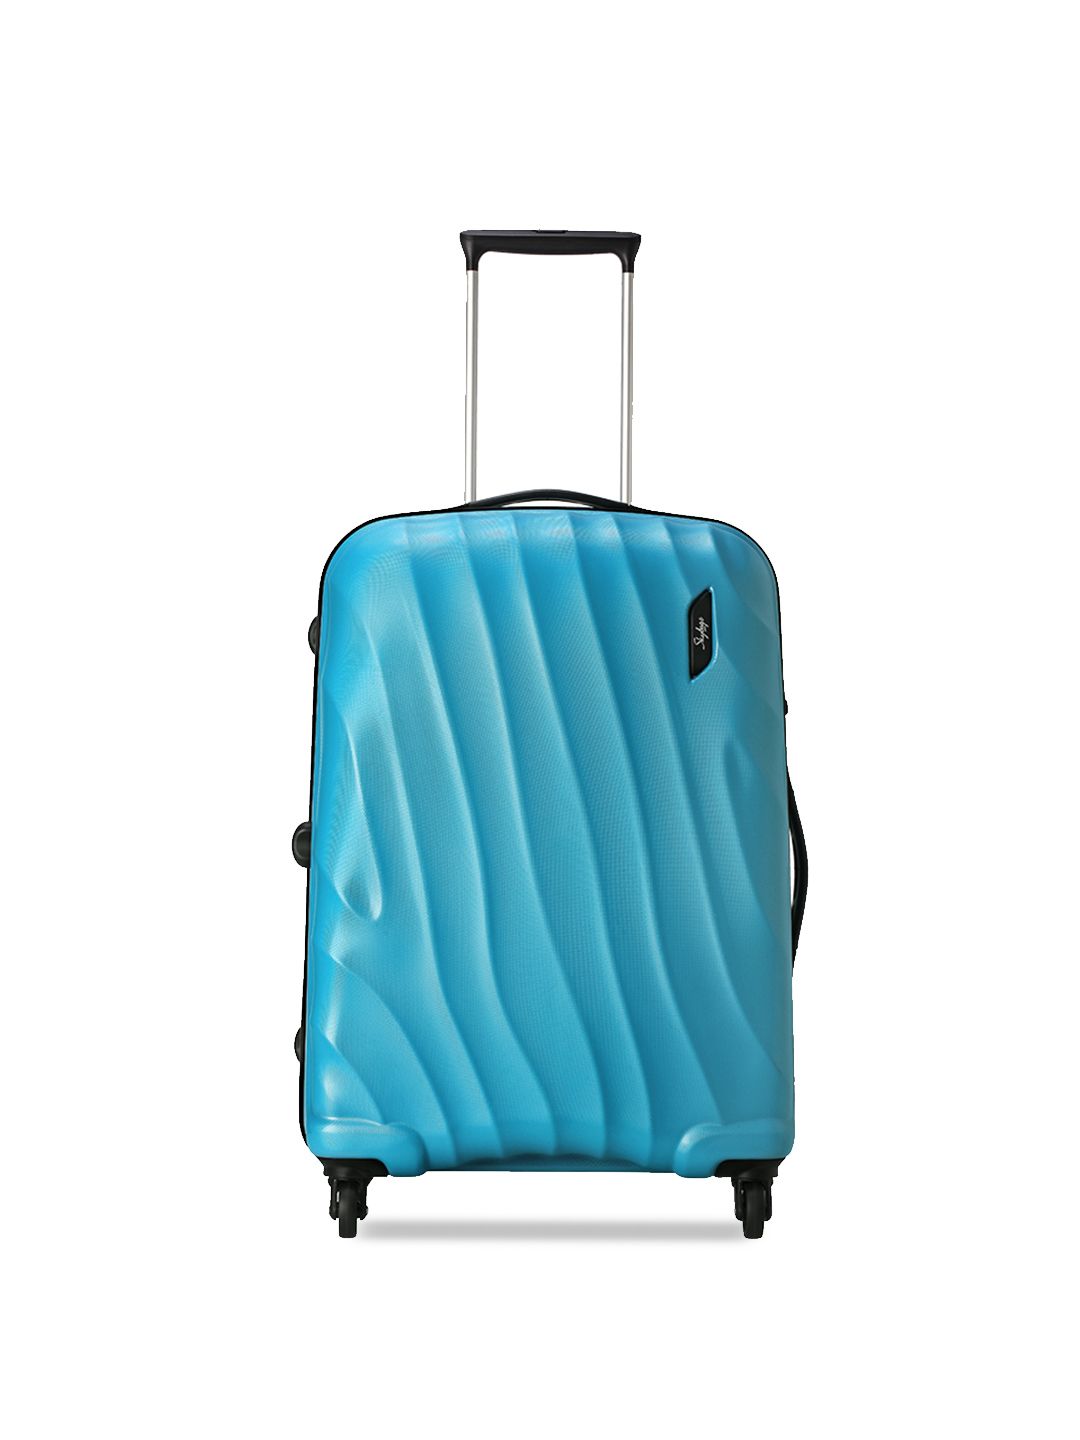 Skybags Blue Large Trolley Suitcase Price in India